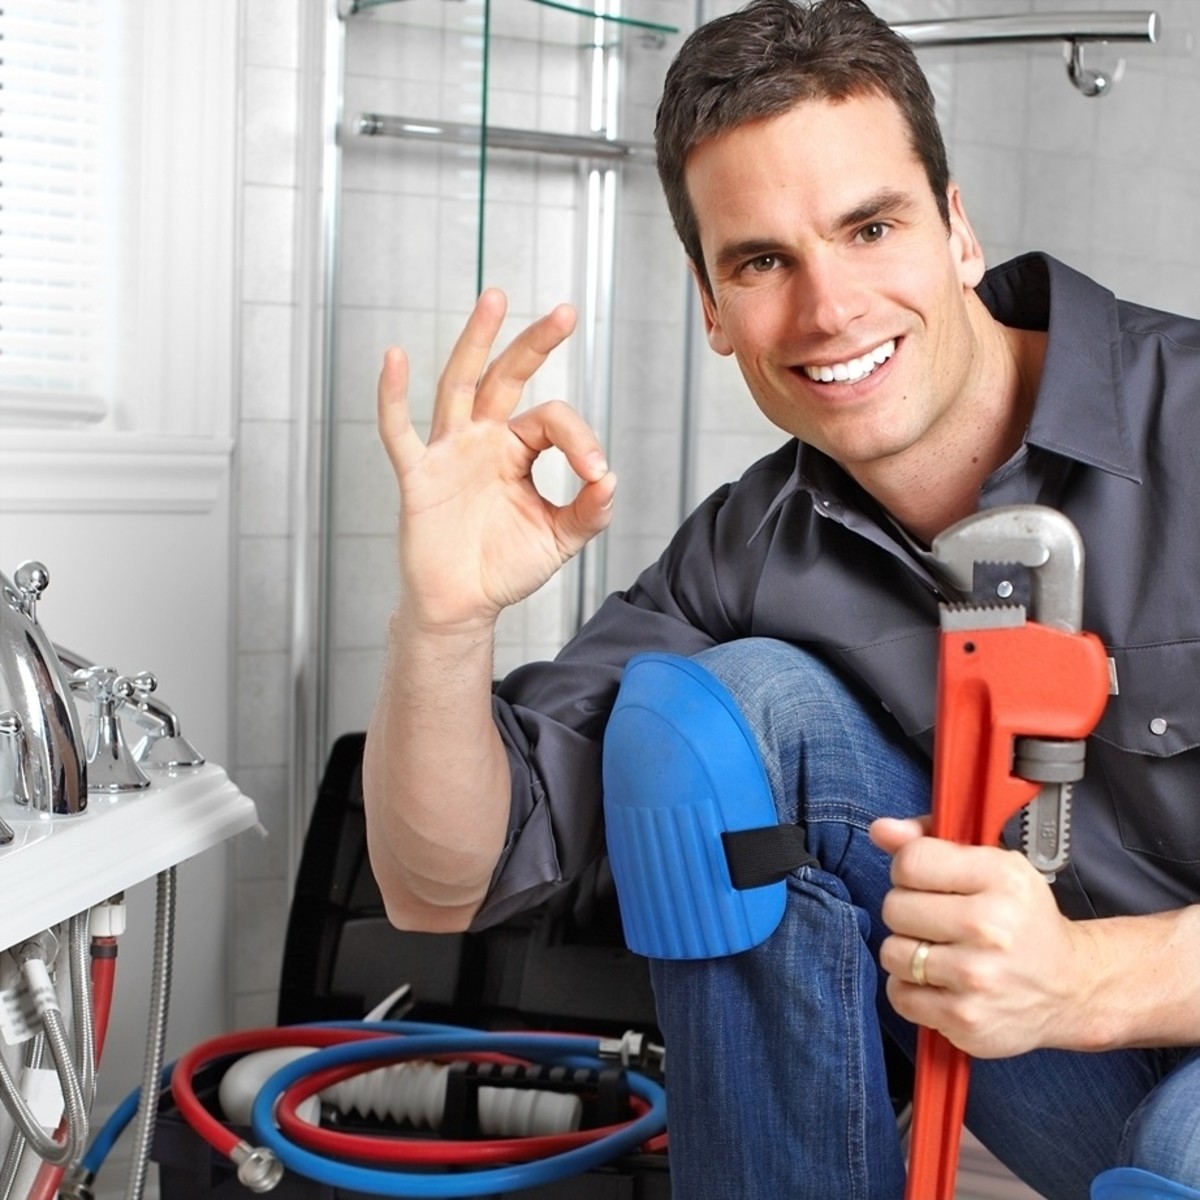 Plumbing Solutions: Finding a Reliable Plumber